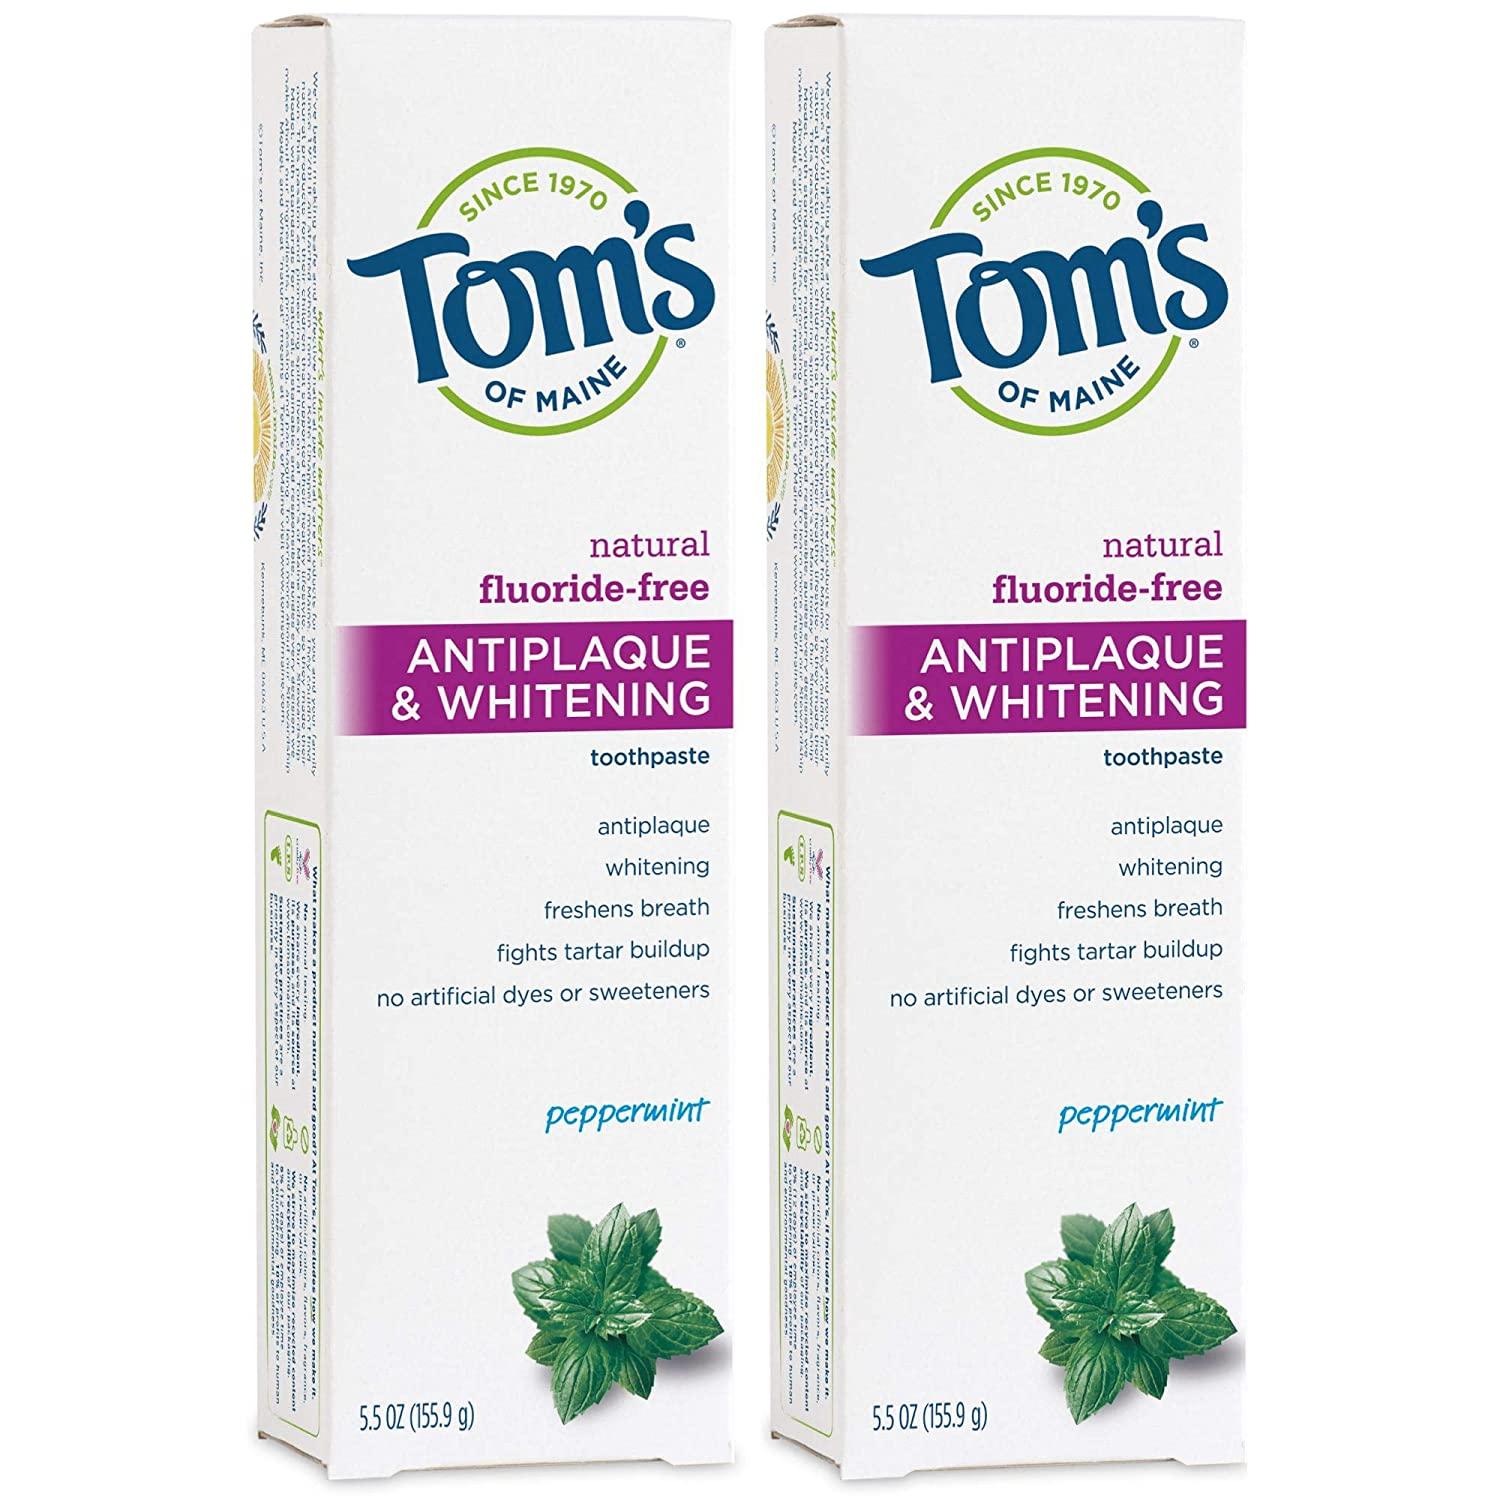 2 Toms of Maine Antiplaque Whitening Toothpaste for $6.05 Shipped